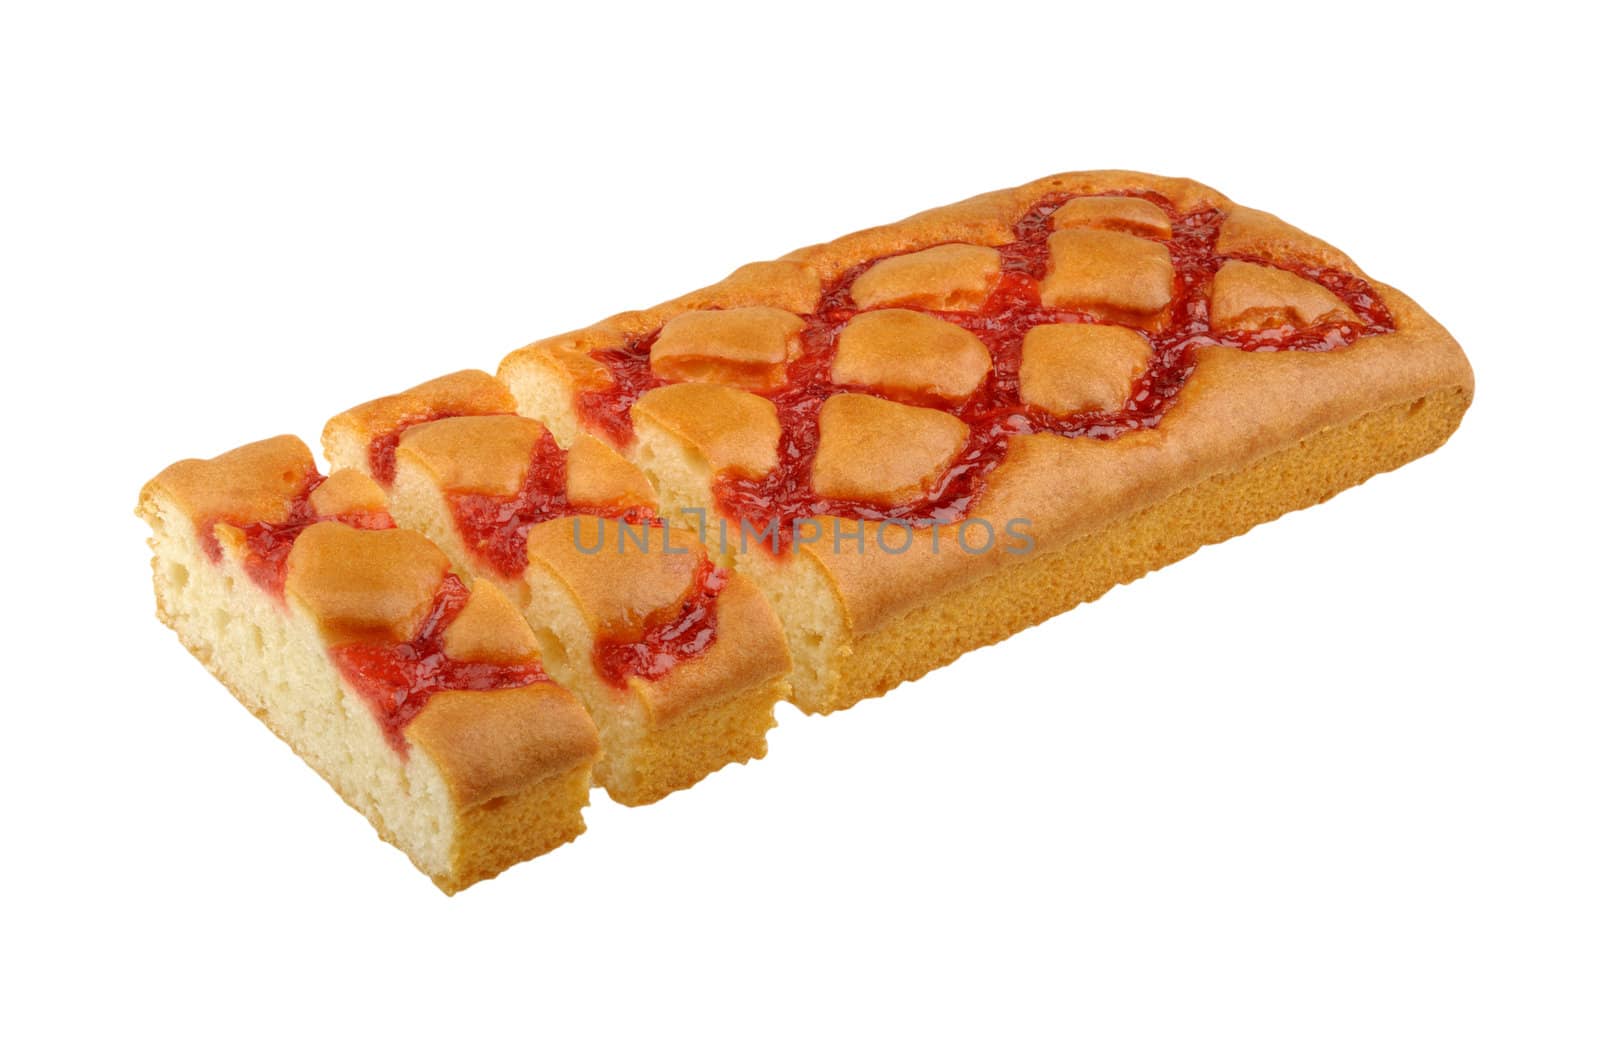 strawberry pie isolated on a white background